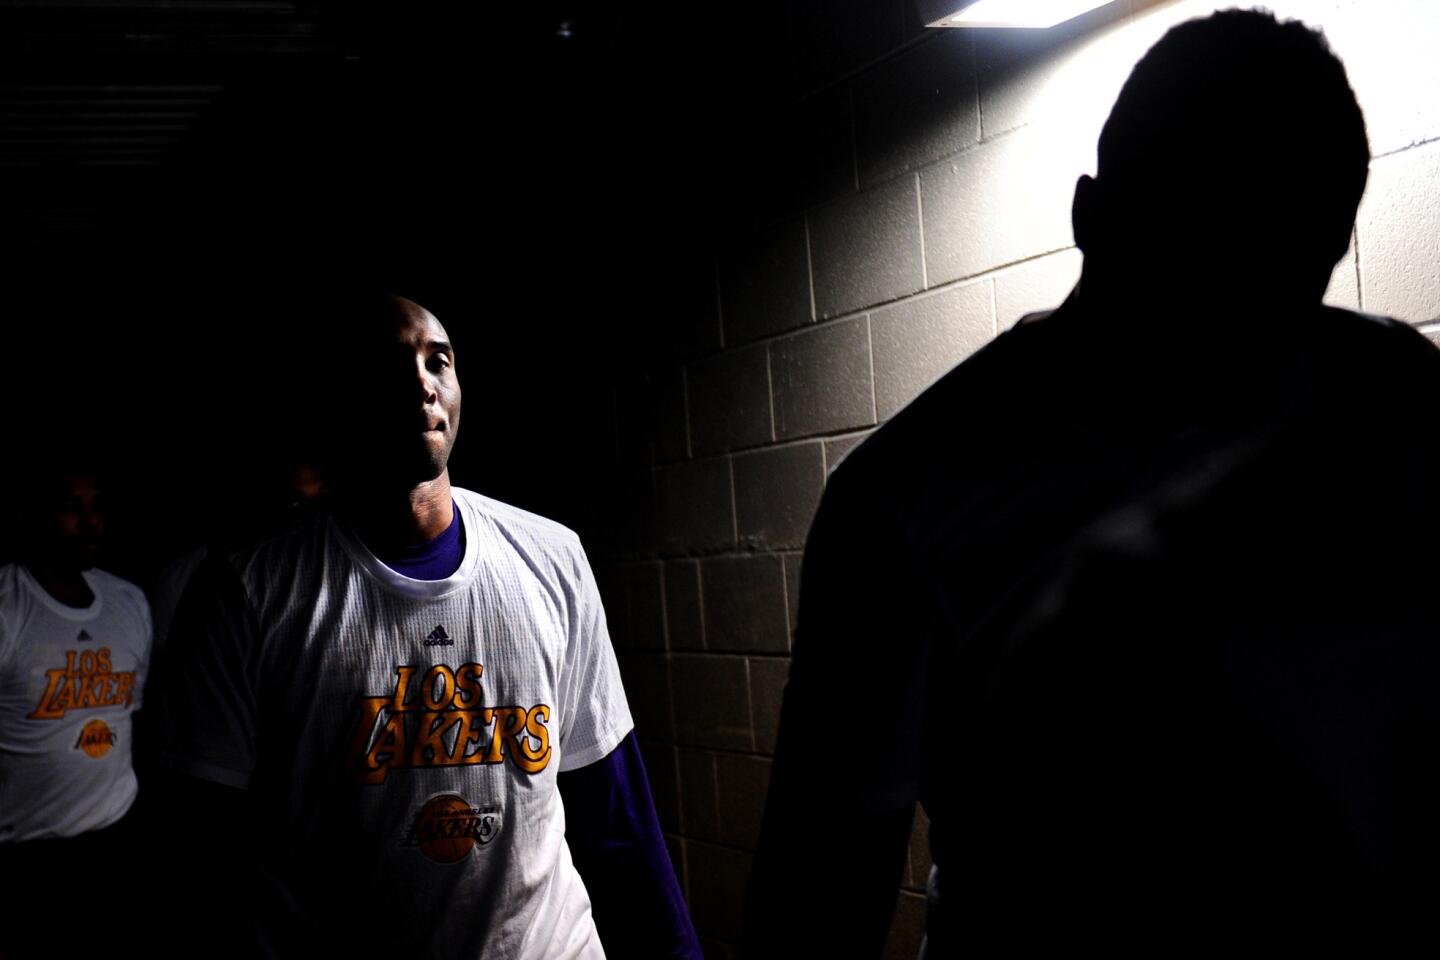 Lakers forward Kobe Bryant heads to the court for the last time in Denver before a game againstthe Nuggetson March 2, 2016.